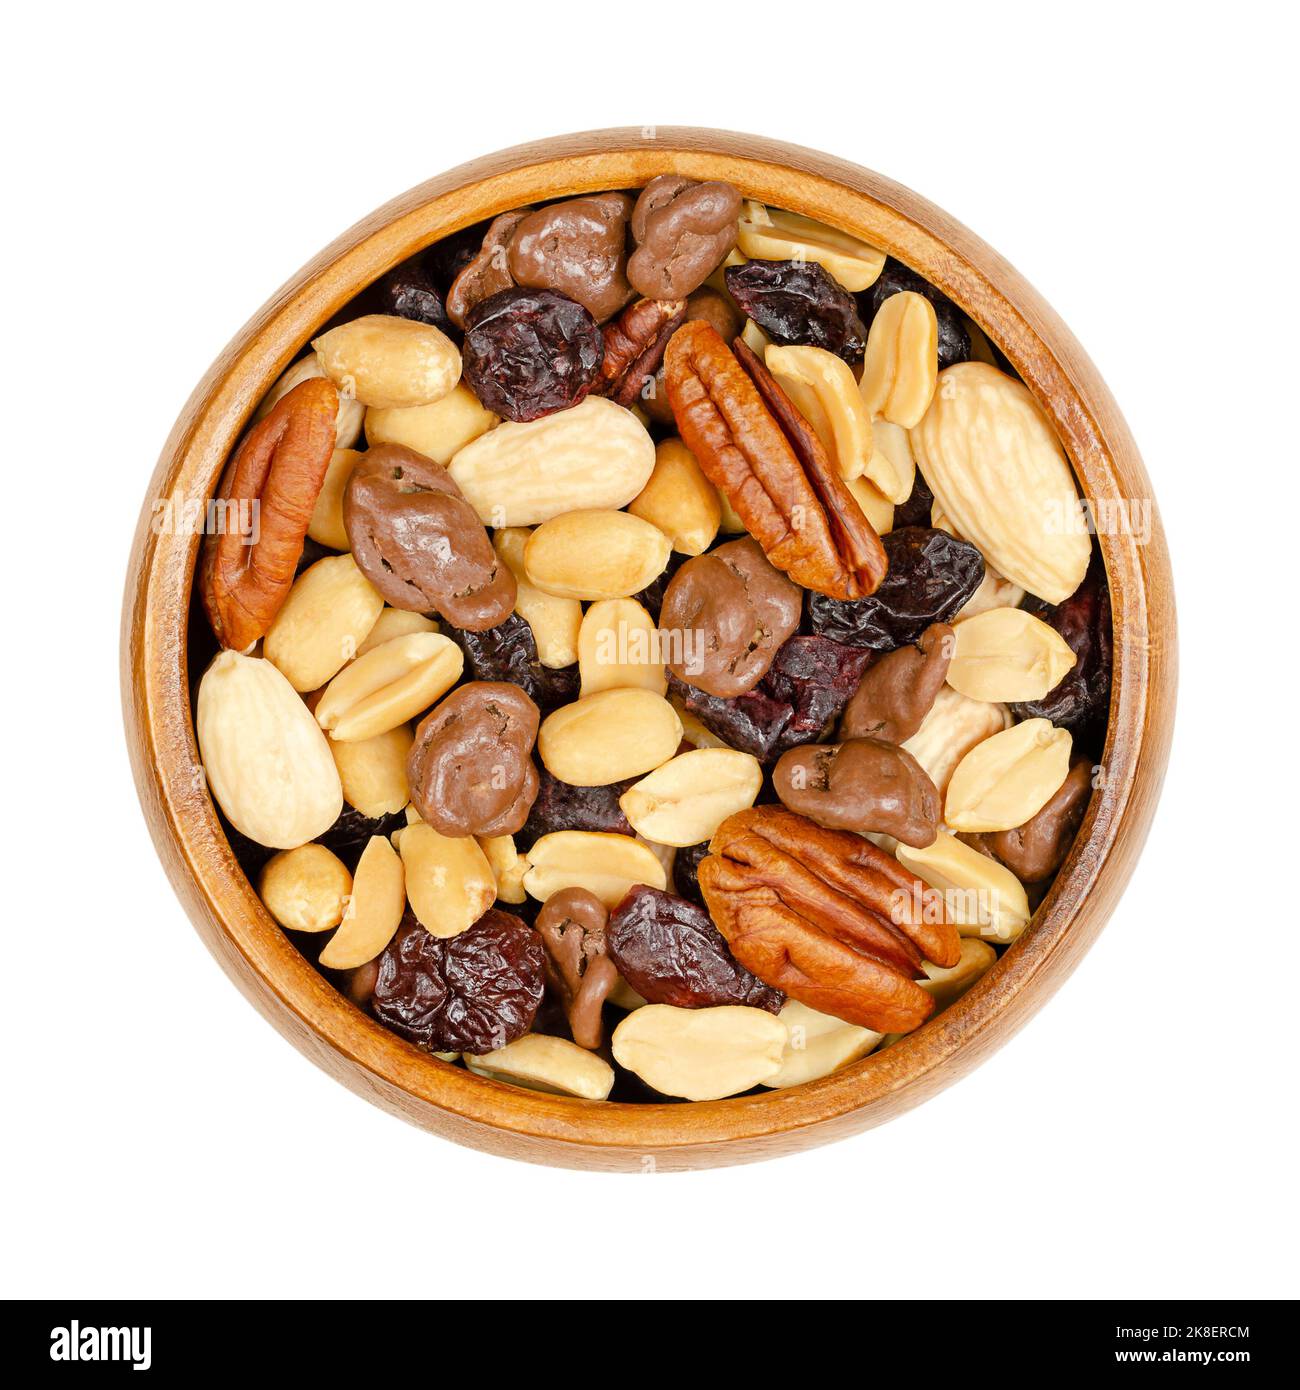 Nut and berry mix, with milk chocolate, in wooden bowl. Sweet snack food of roasted pecans, almonds, peanuts, dried cranberries and chocolate. Stock Photo